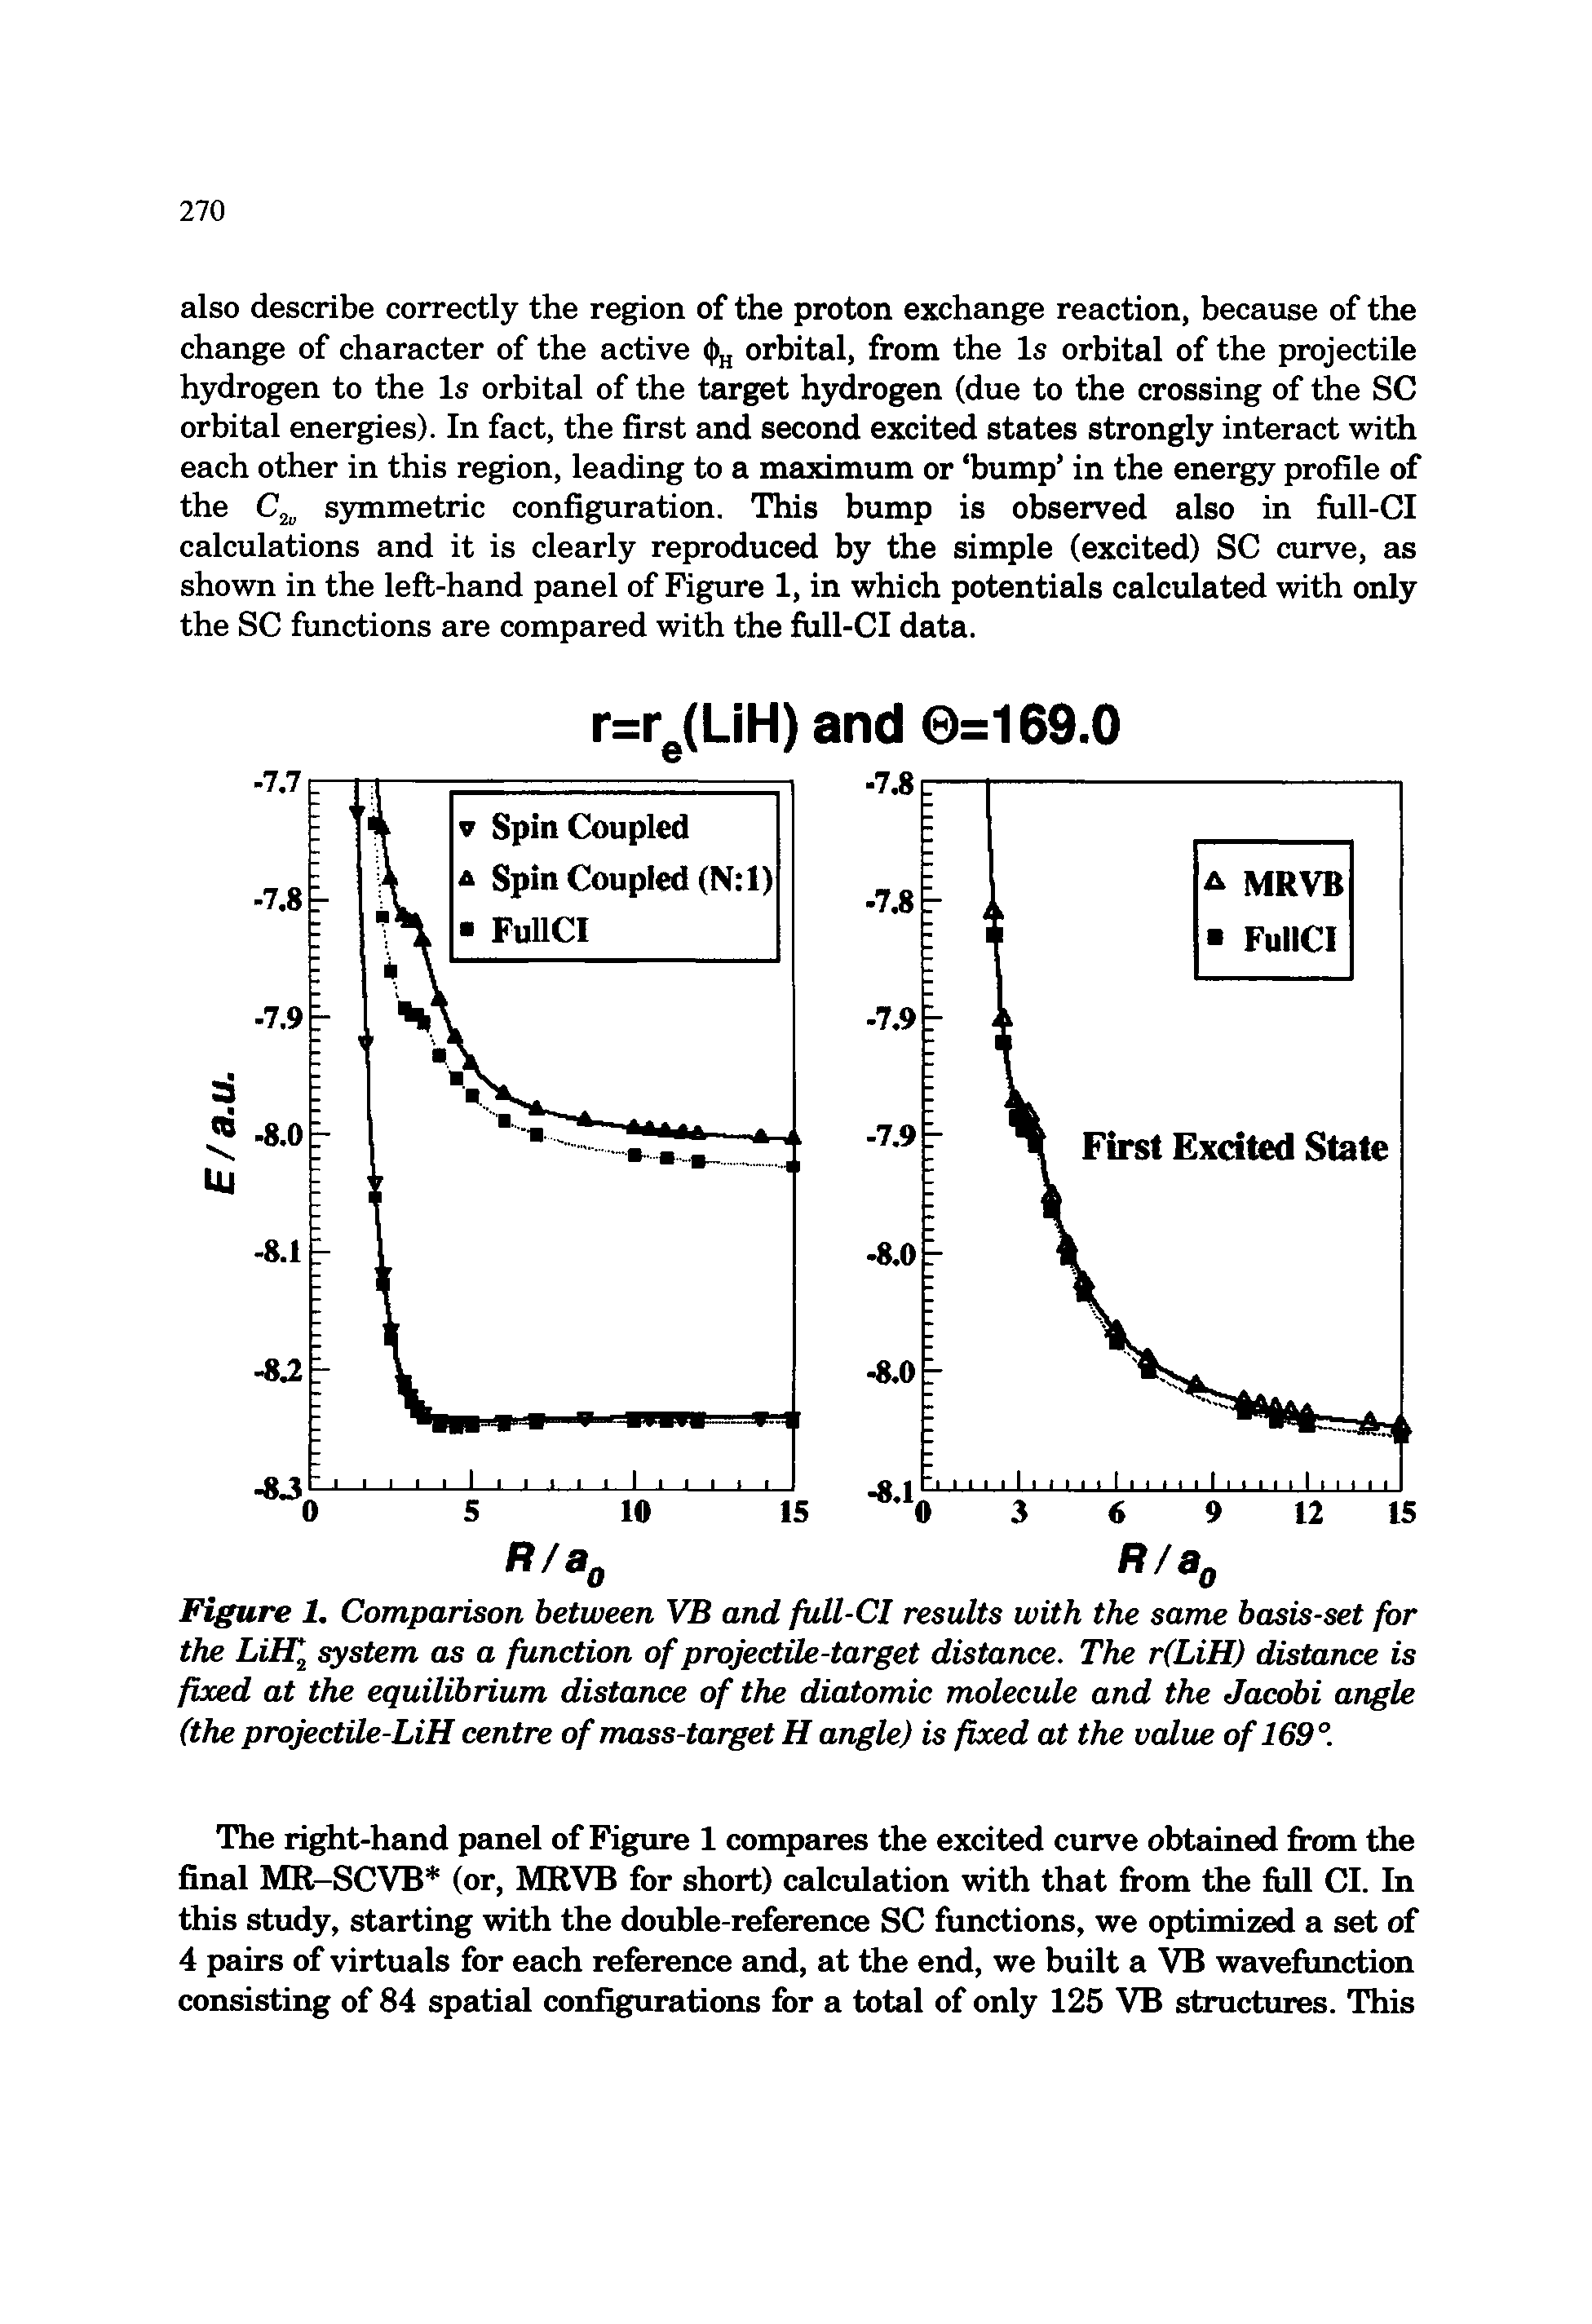 Figure 1. Comparison between VB and full-CI results with the same basis-set for the LiH system as a function of projectile-target distance. The r(LiH) distance is fixed at the equilibrium distance of the diatomic molecule and the Jacobi angle (the projectile-LiH centre of mass-target H angle) is fixed at the value of 169°.